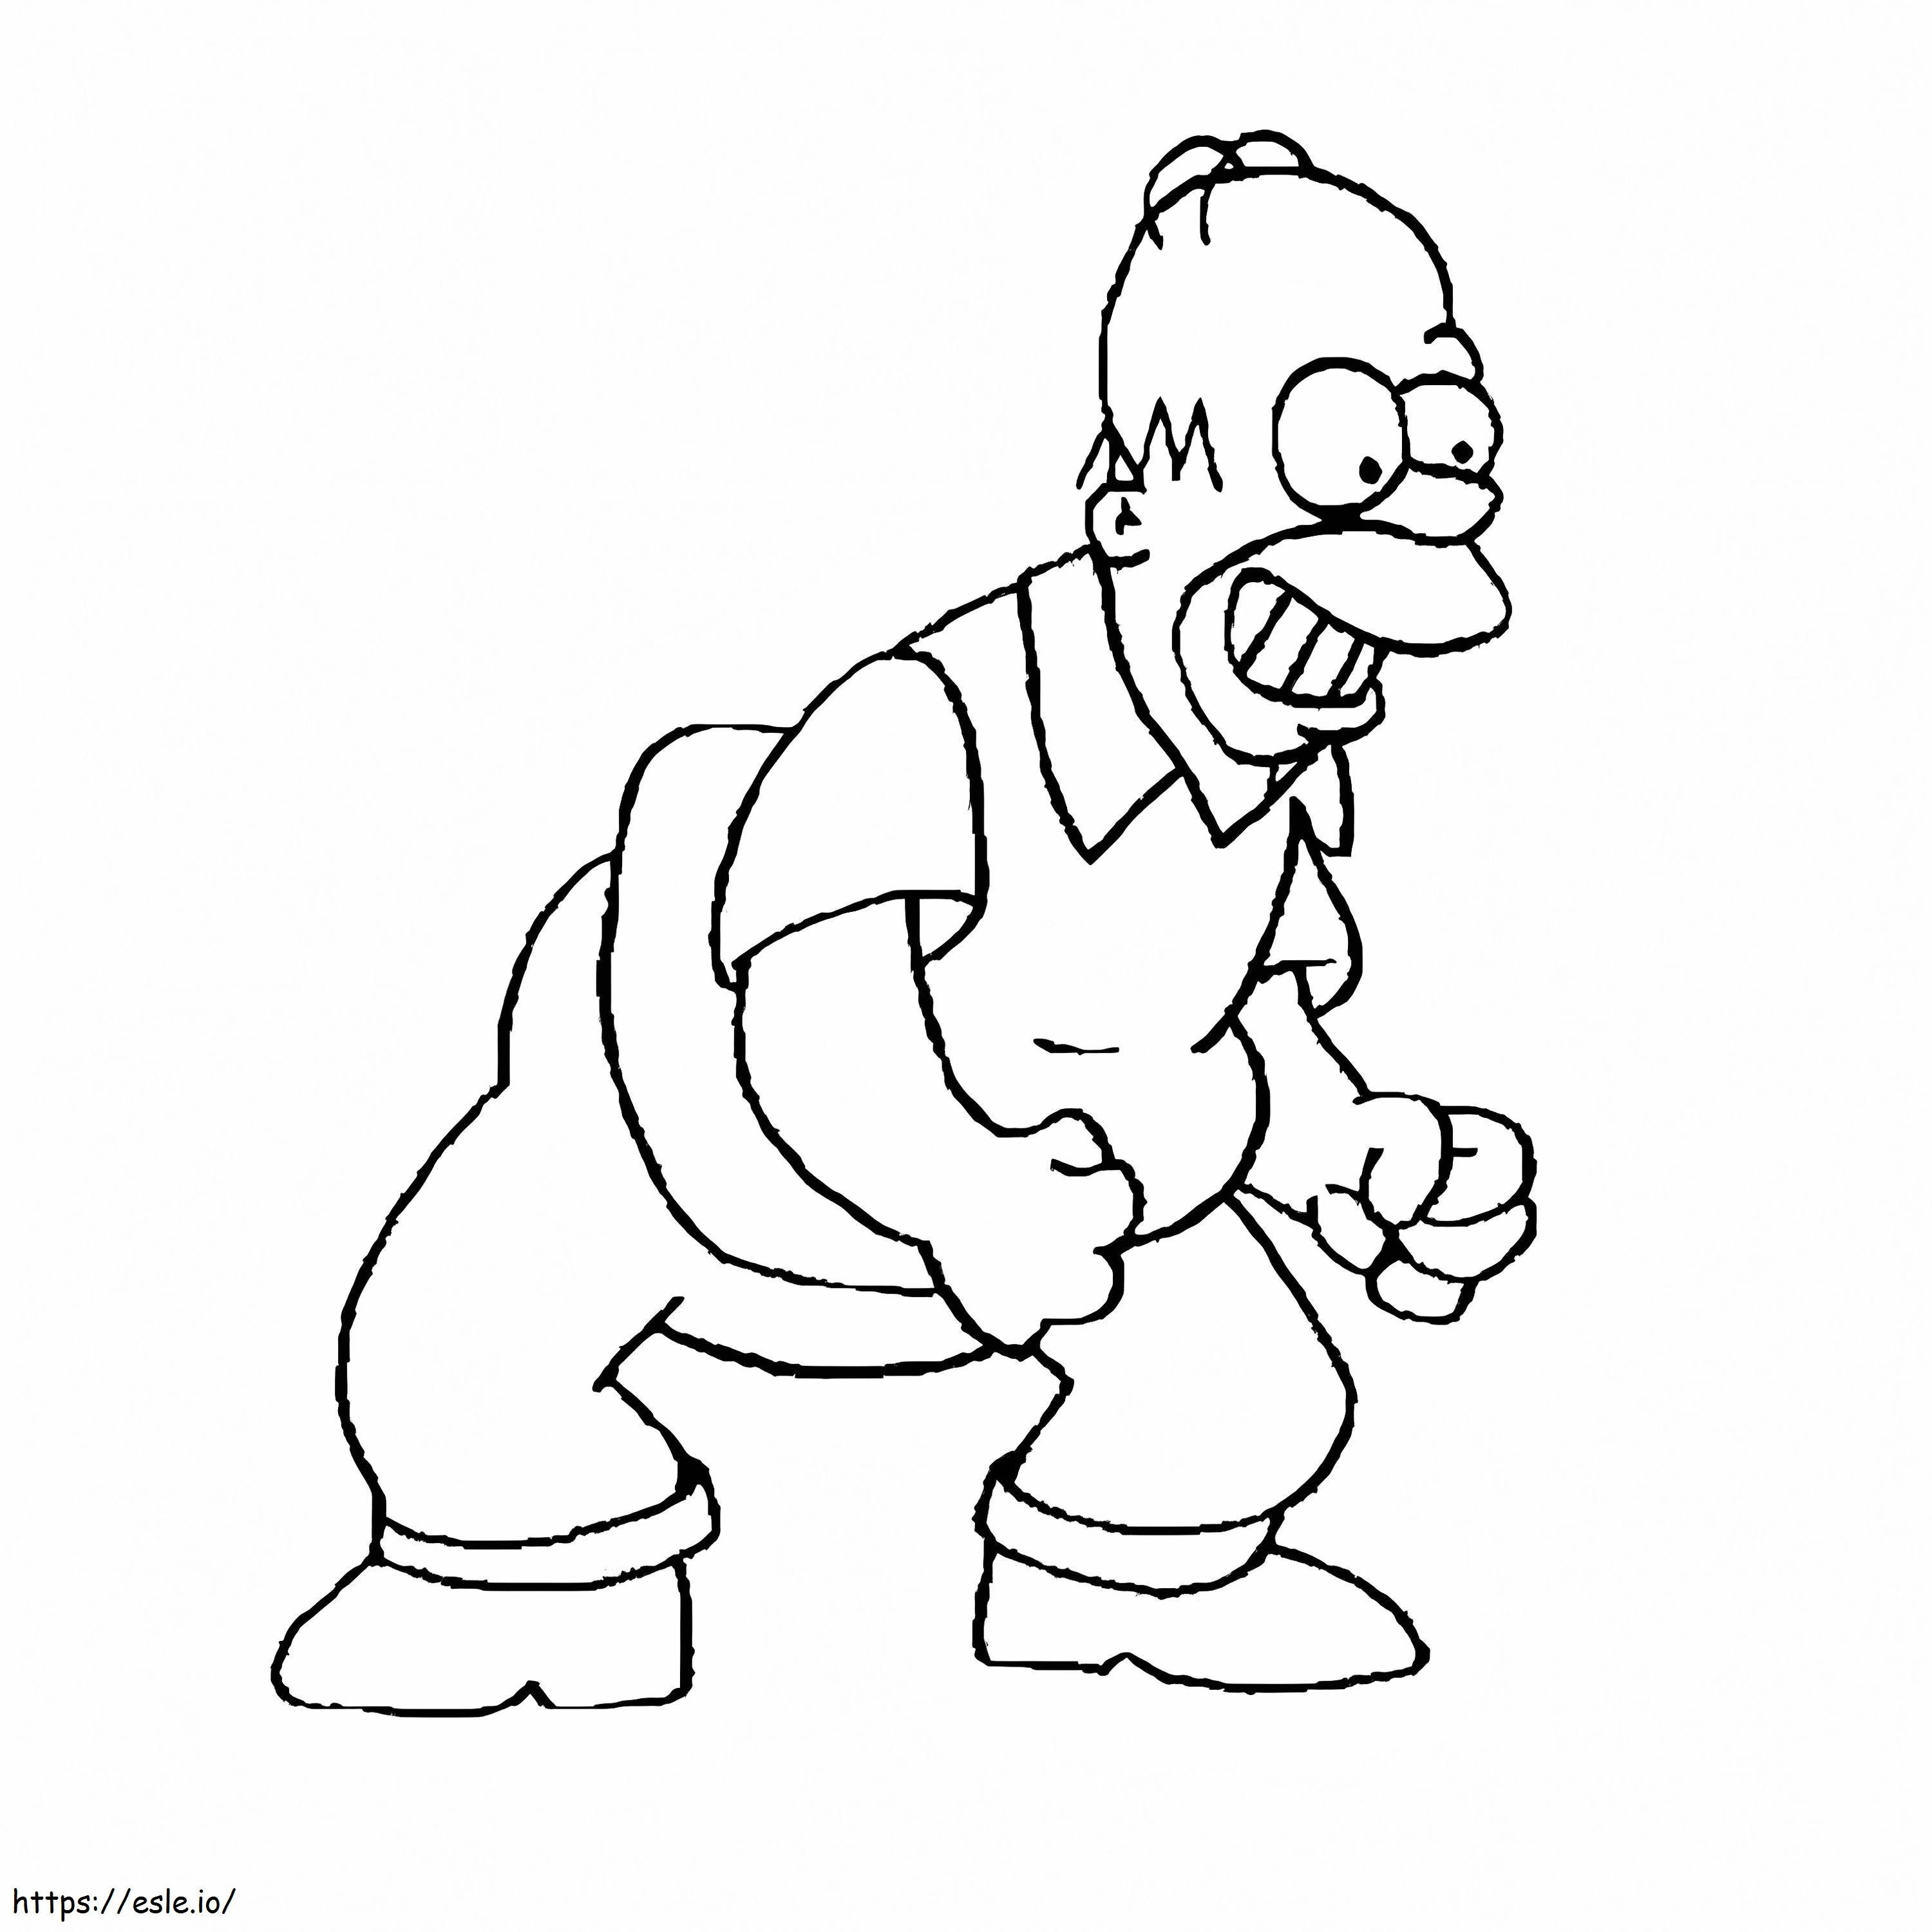 Smiling Homer Simpson coloring page